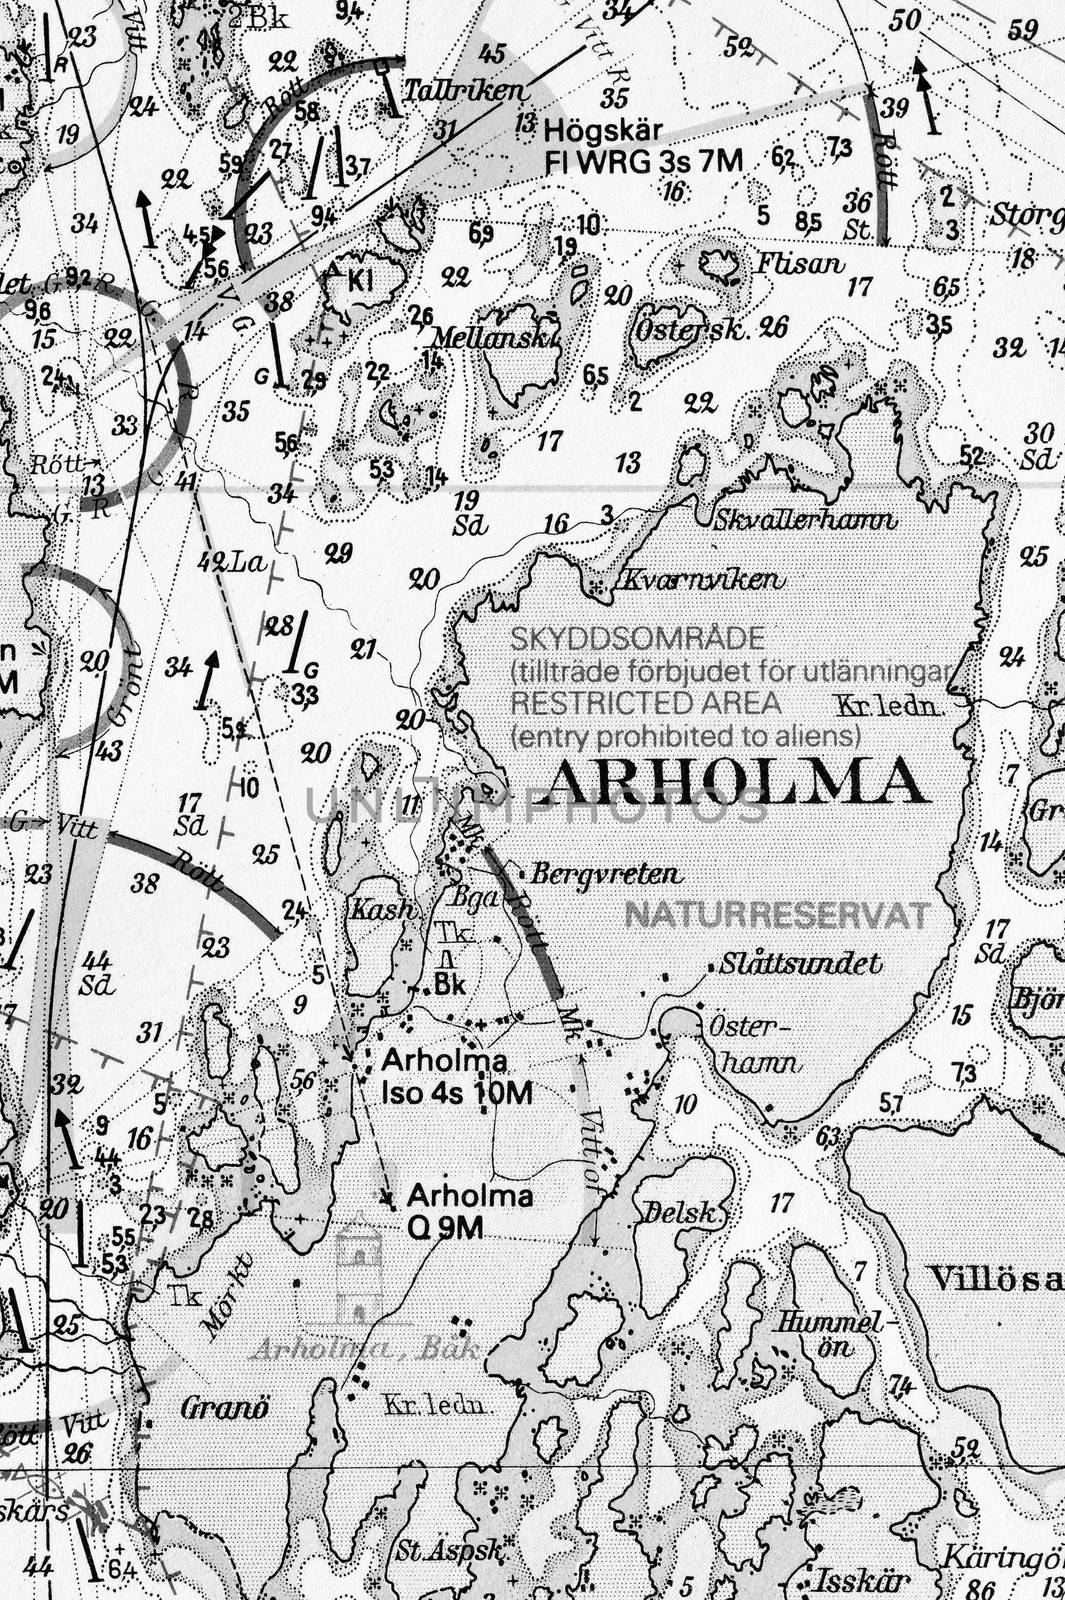 Macro shot of a old marine chart, detailing Stockholm archipelago by a40757